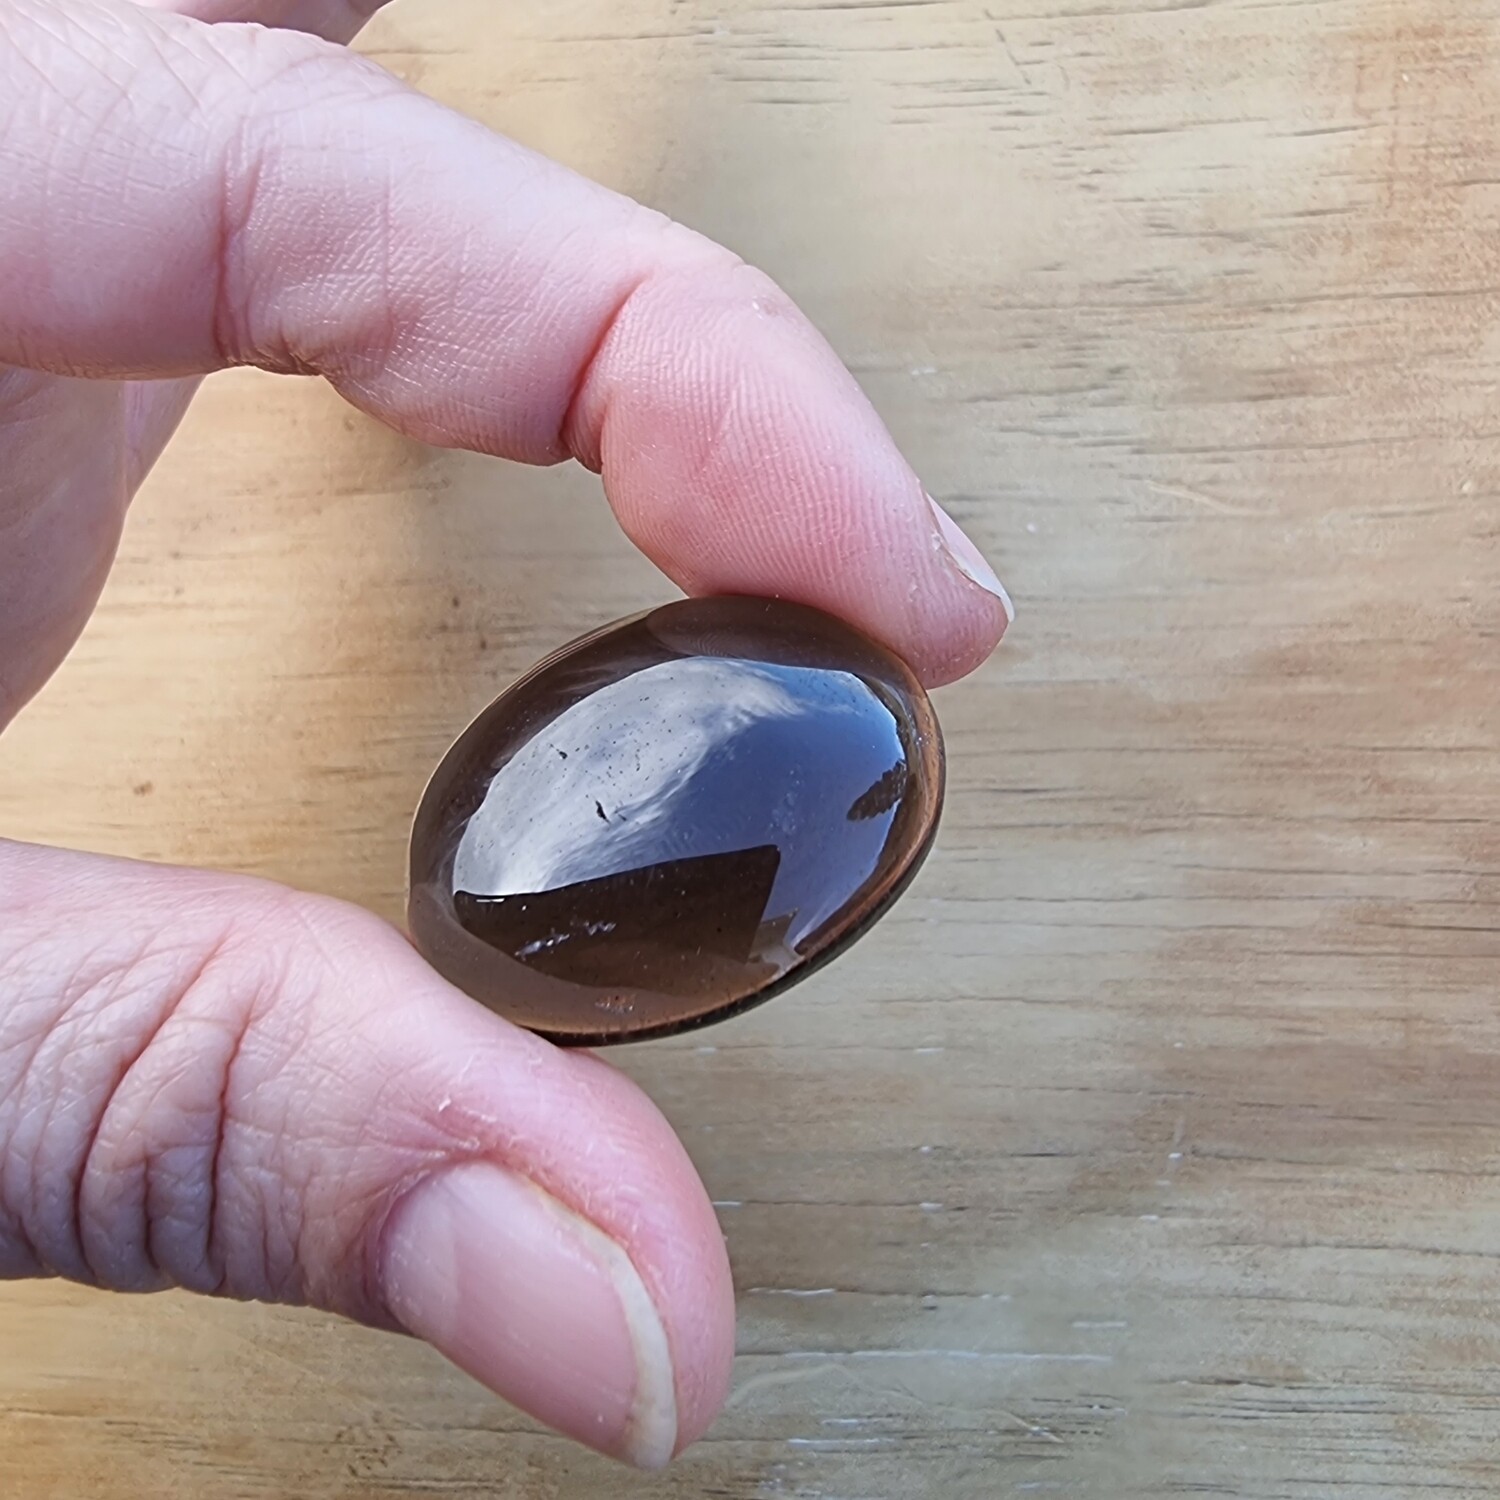 Smokey Quartz Cabochon / Pendant for jewelry making or diy craft projects 10gr